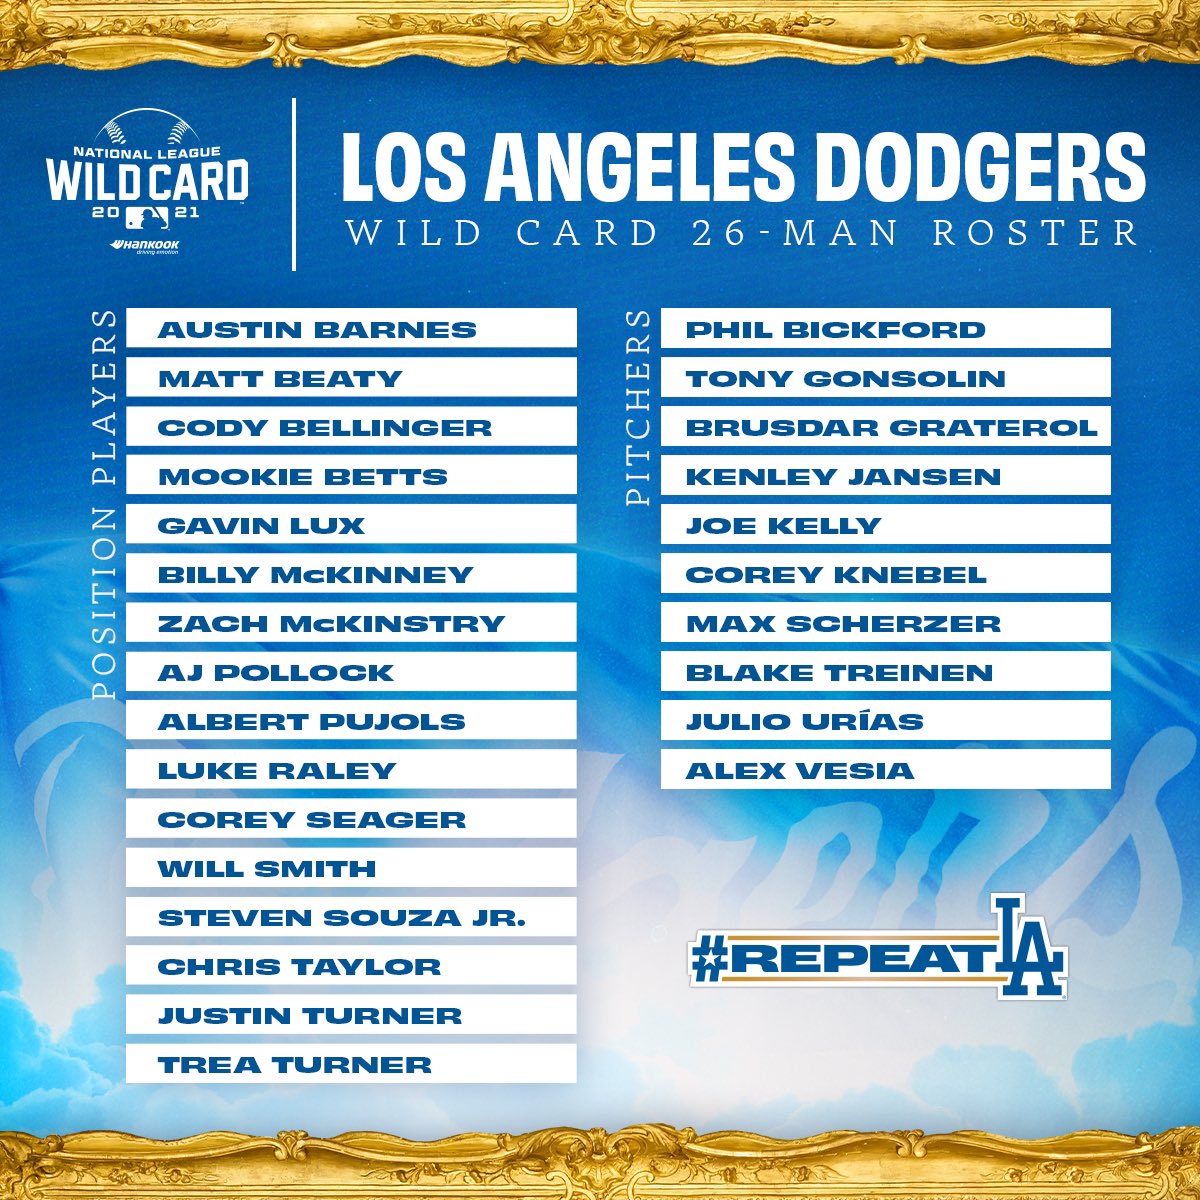 Dodgers NL wild card roster